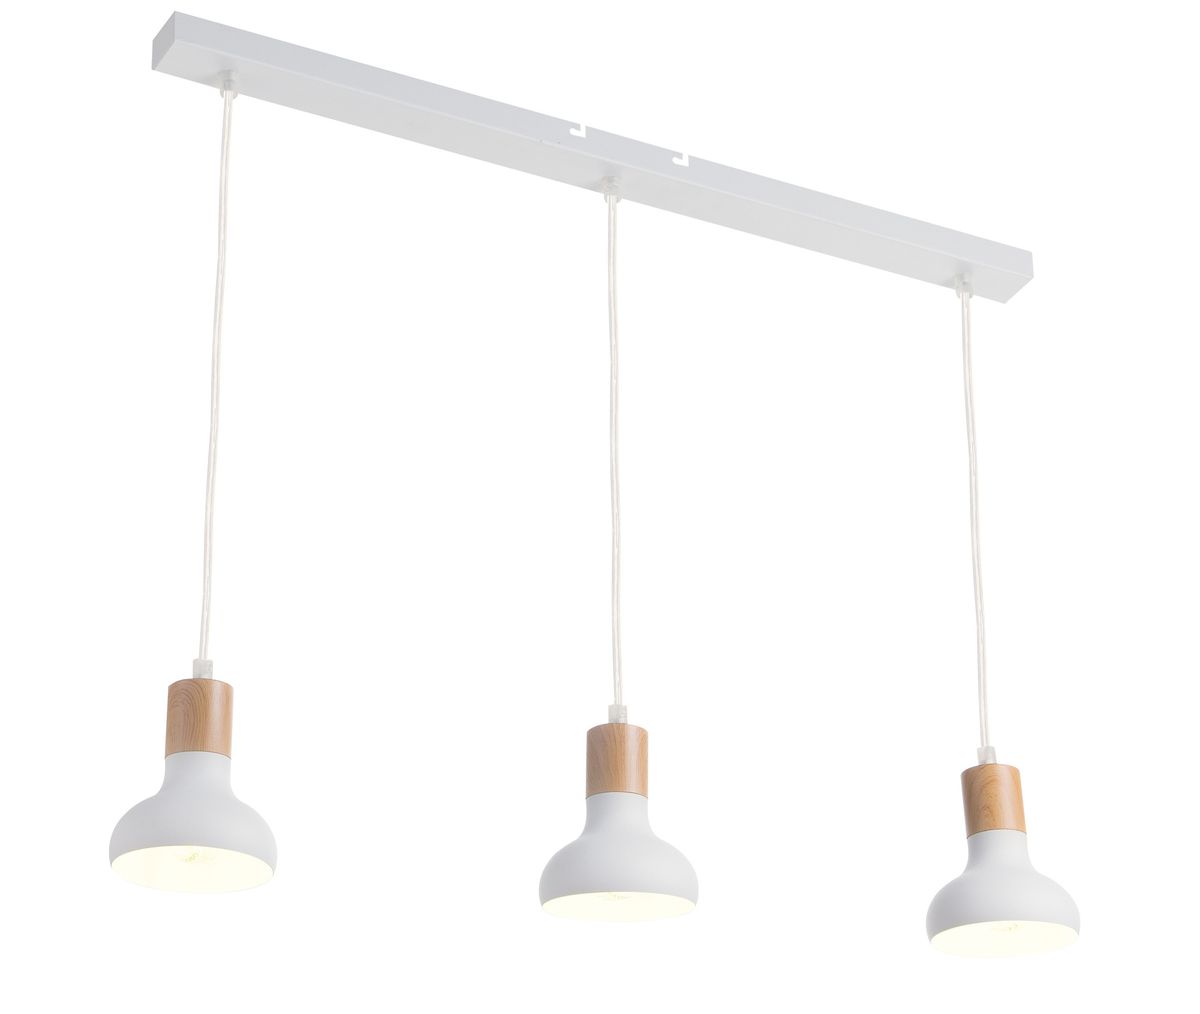 3 Light White Pendant with Adjustable Cords - Future Light - LED Lights South Africa